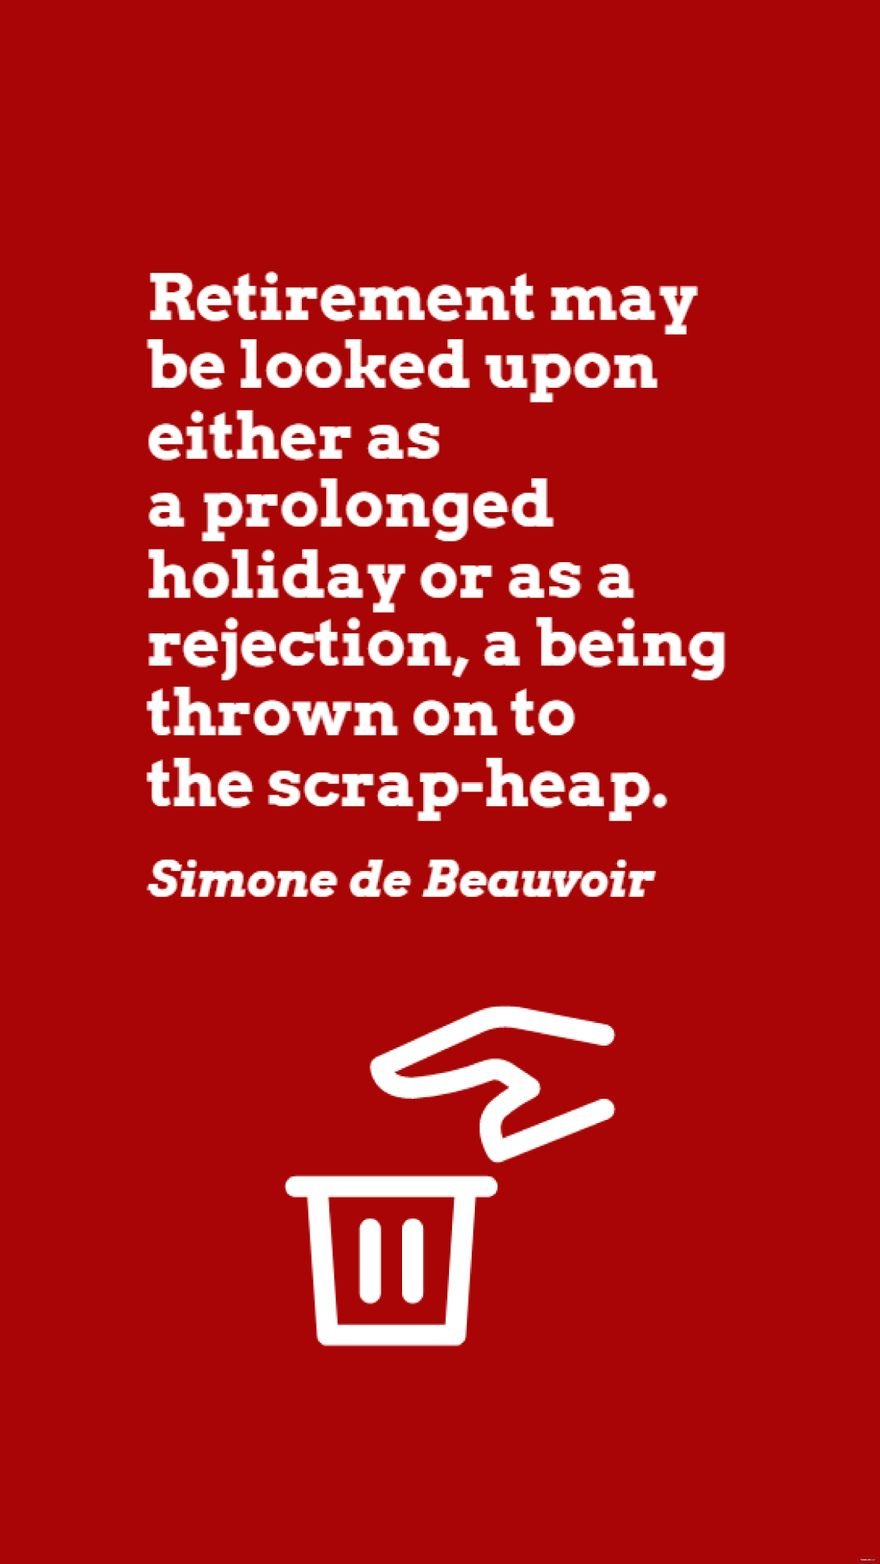 Free Simone de Beauvoir - Retirement may be looked upon either as a prolonged holiday or as a rejection, a being thrown on to the scrap-heap. in JPG